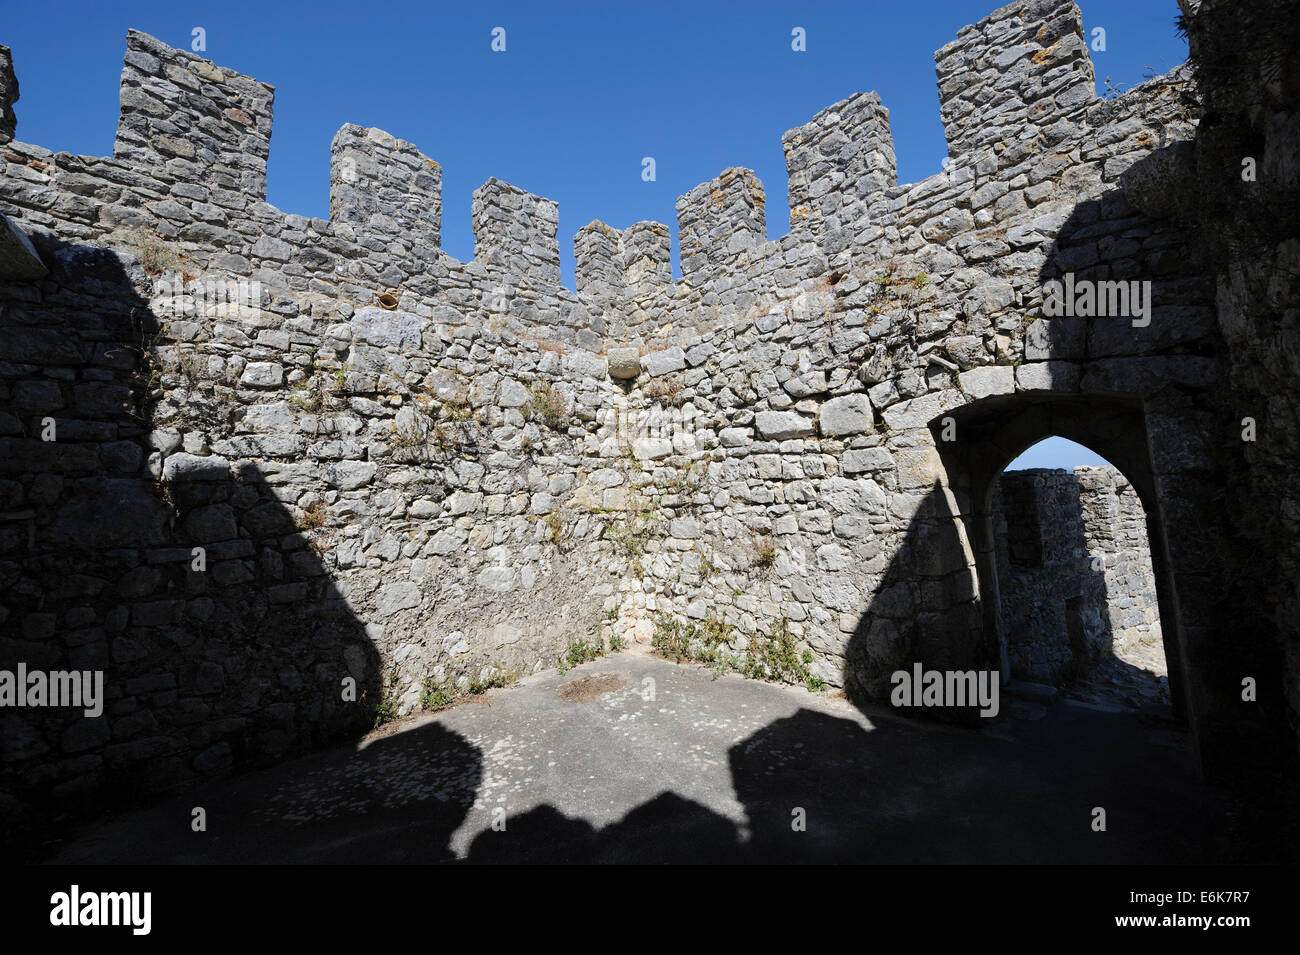 Crenelated walls of a medieval castle Stock Photo